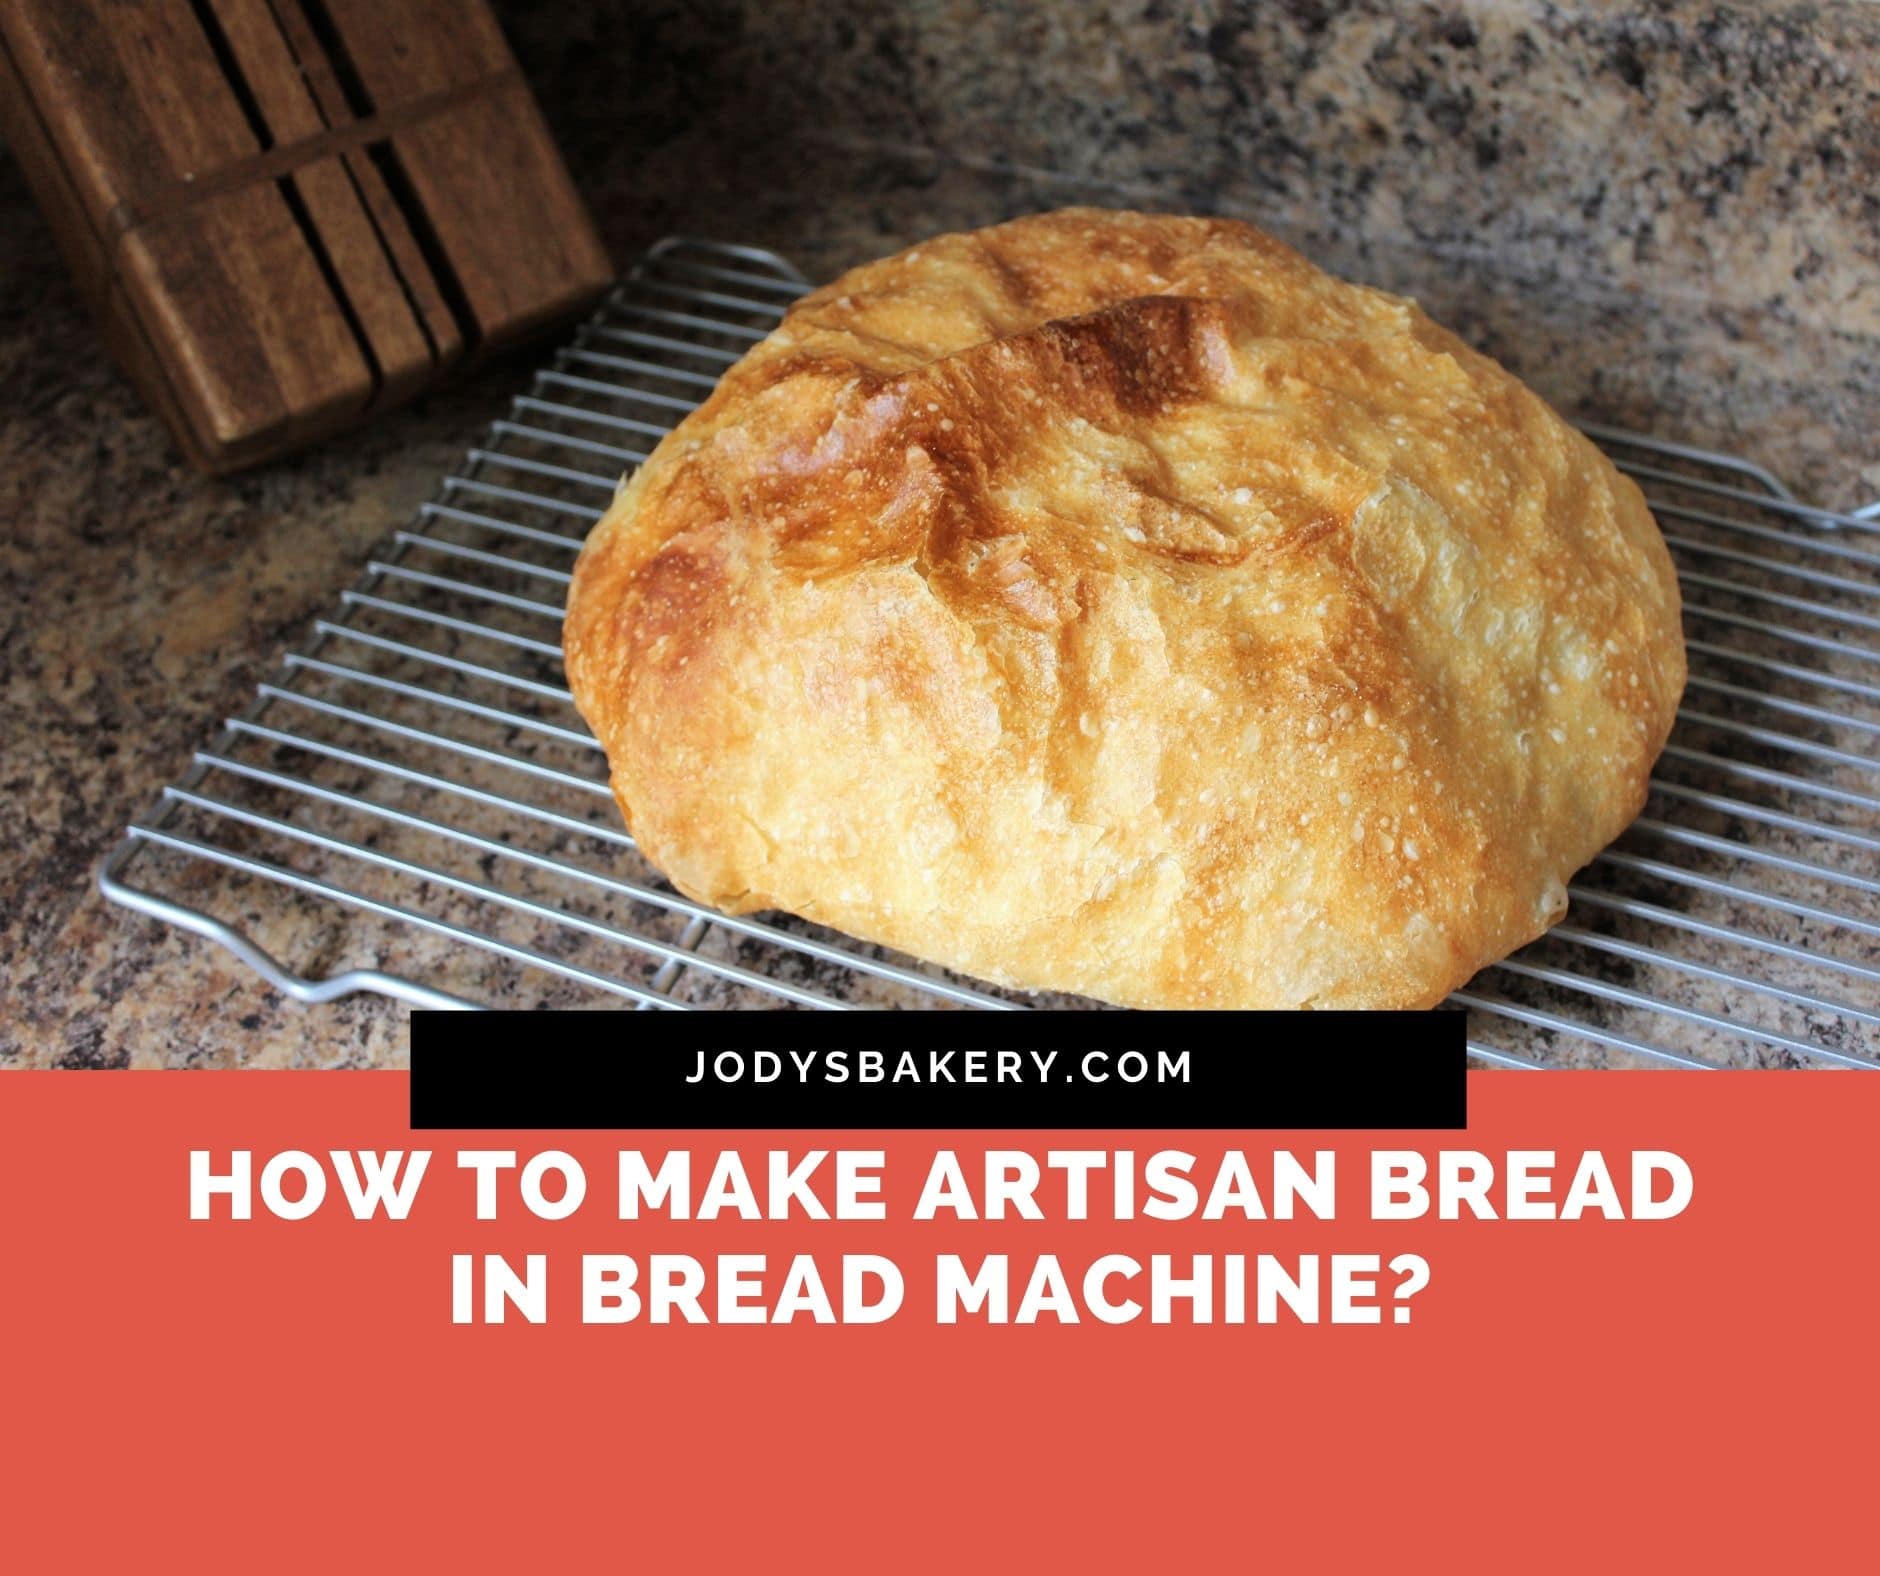 How to make artisan bread in bread machine?